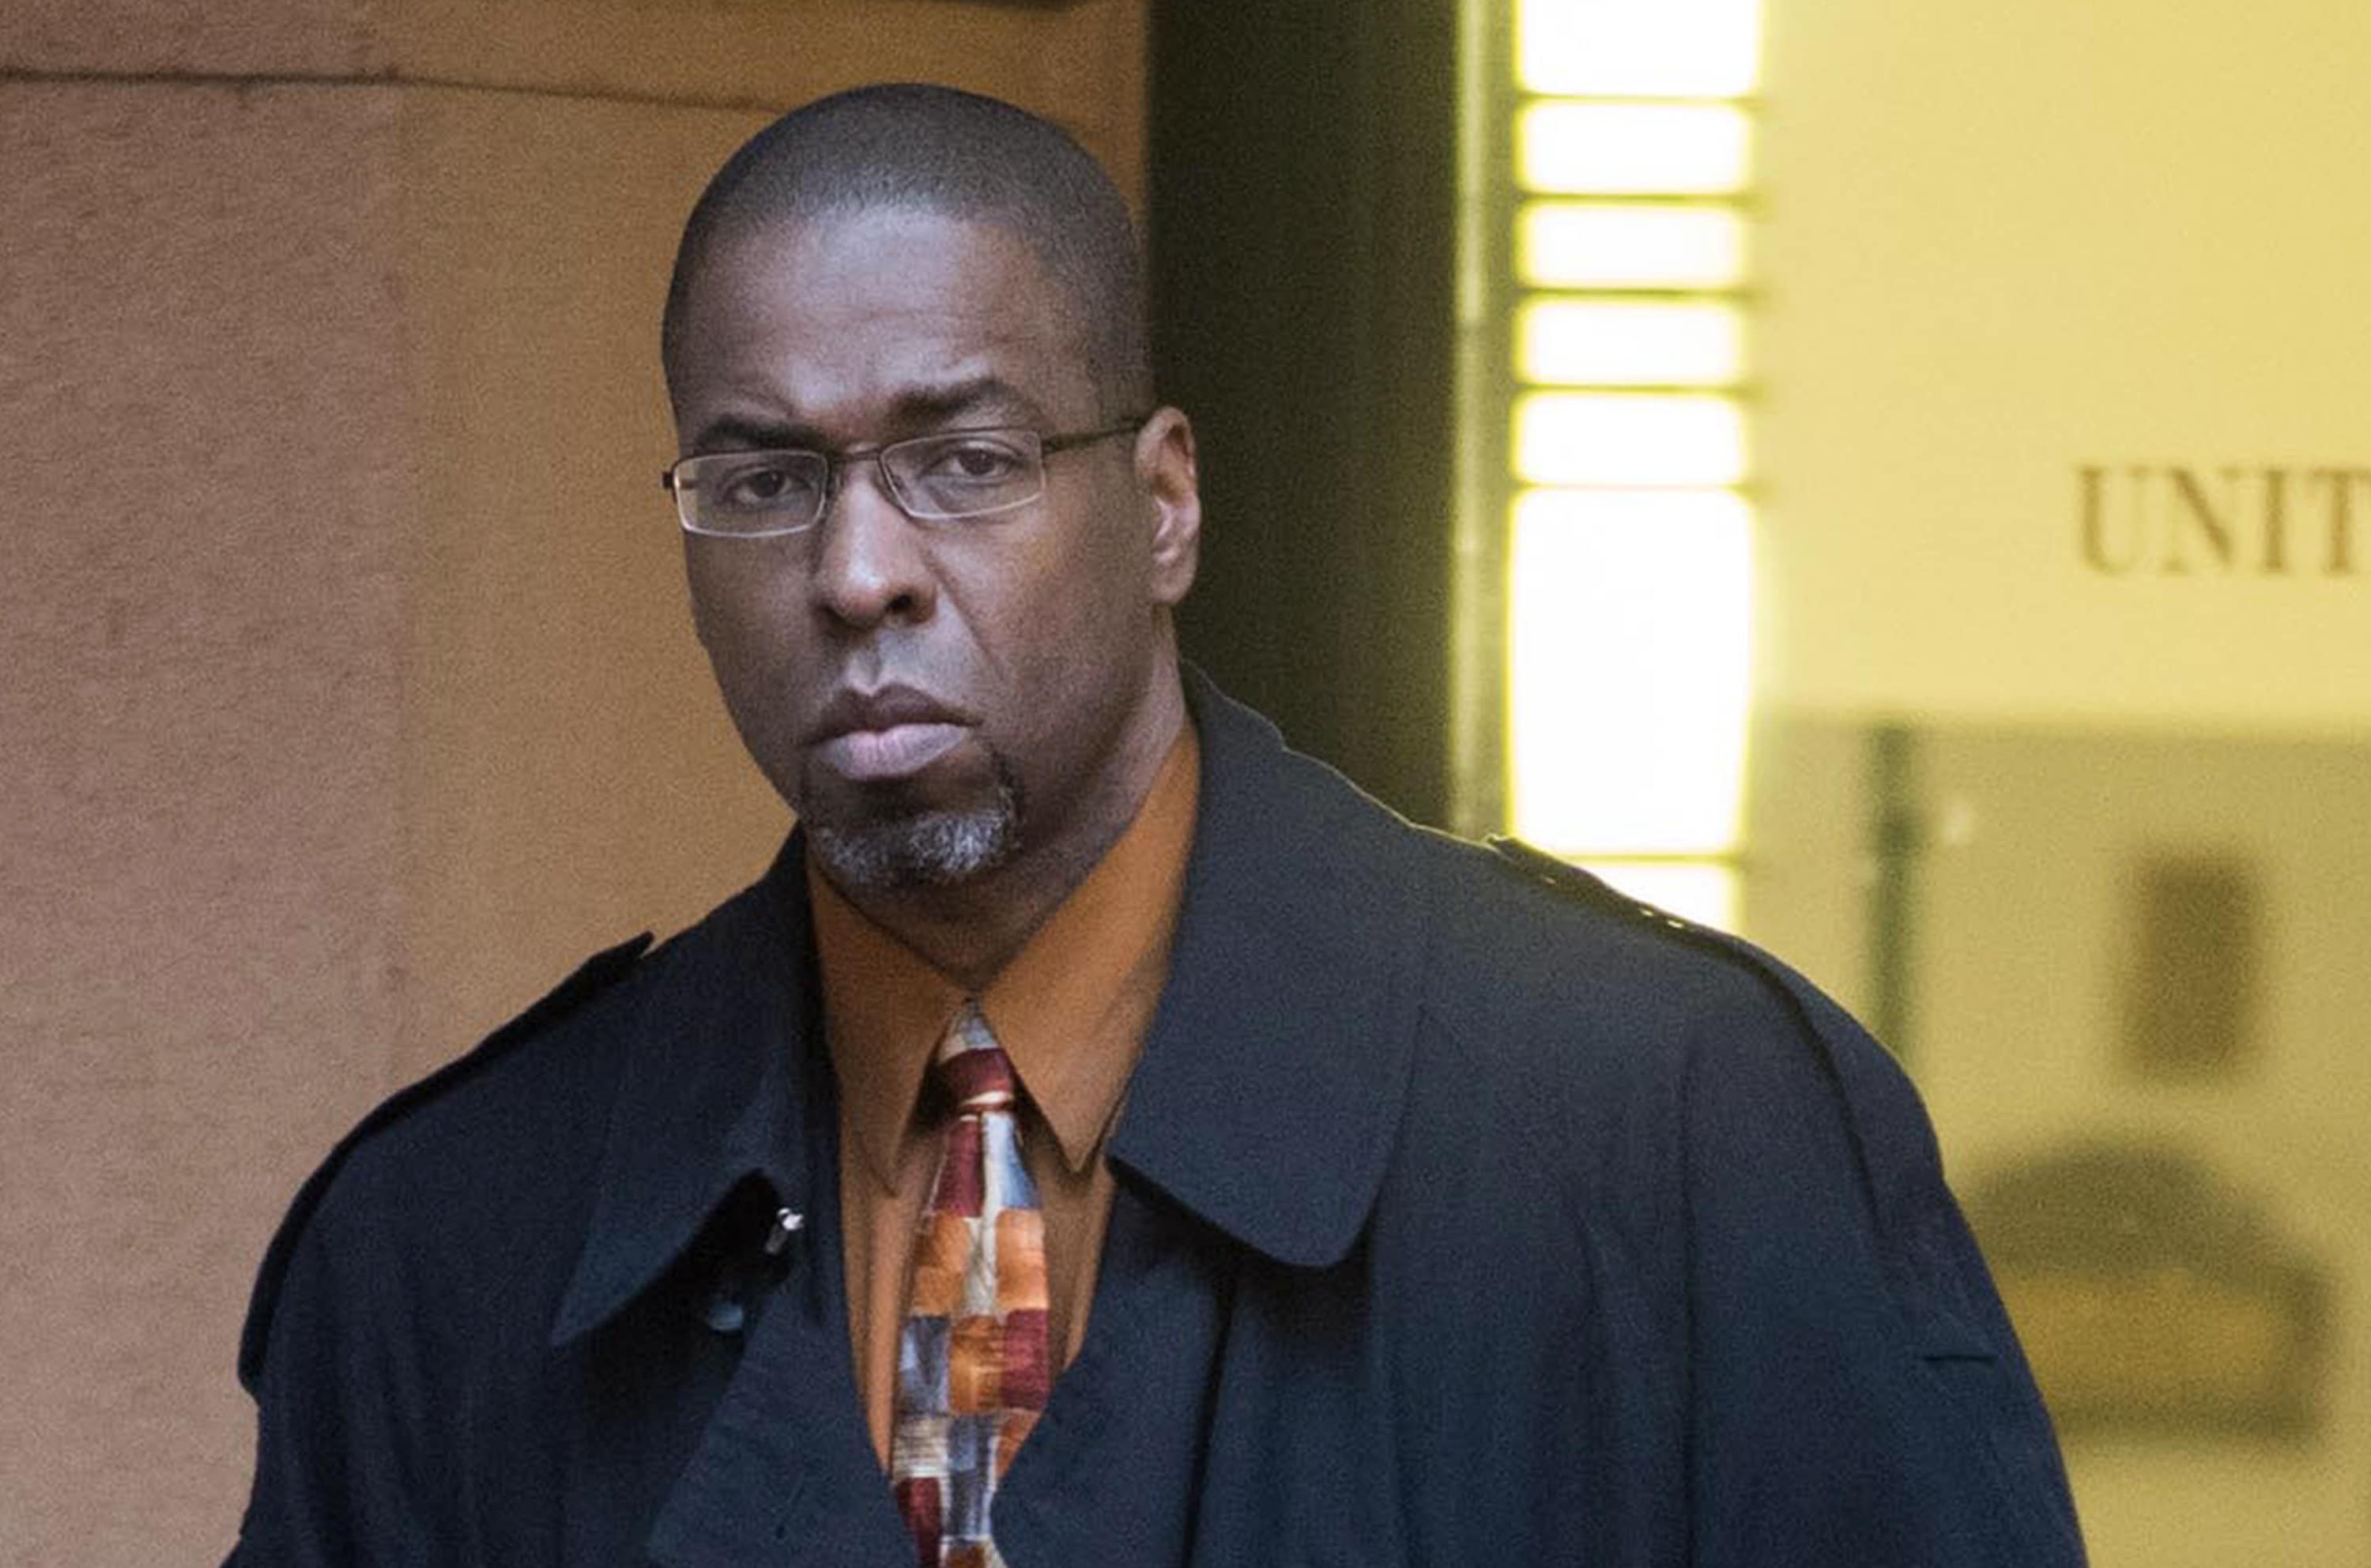 Former CIA officer Jeffrey Sterling leaves federal court in Alexandria, Virginia, AP Foto/Kevin Wolf